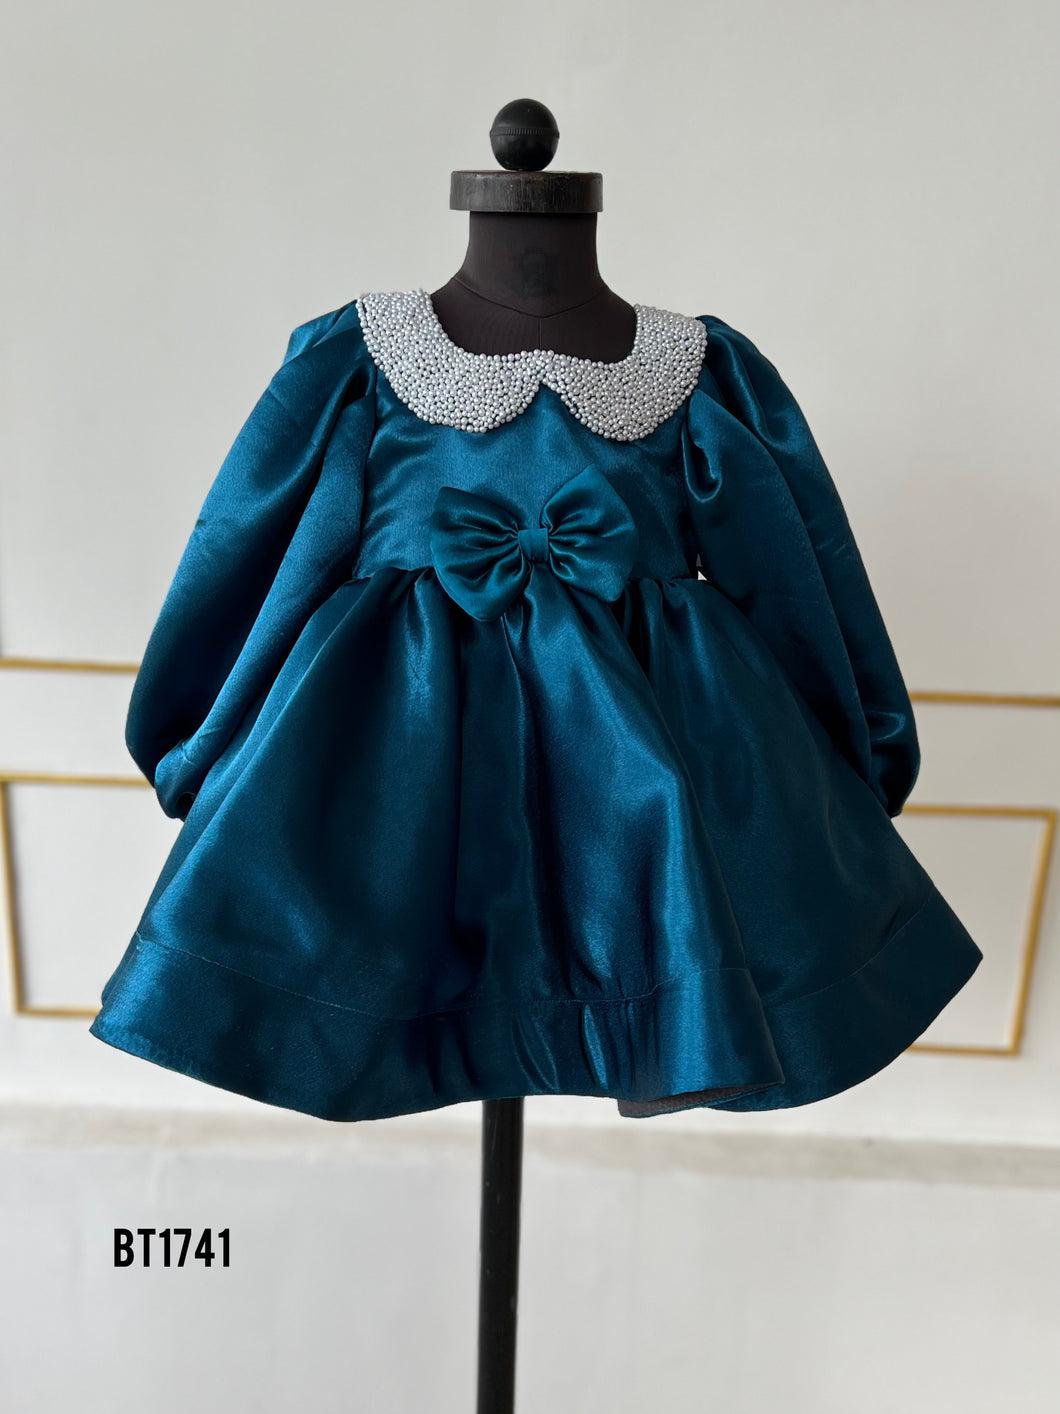 BT1741 Enchanted Teal Princess Dress - A Touch of Sparkle for Your Little Gem